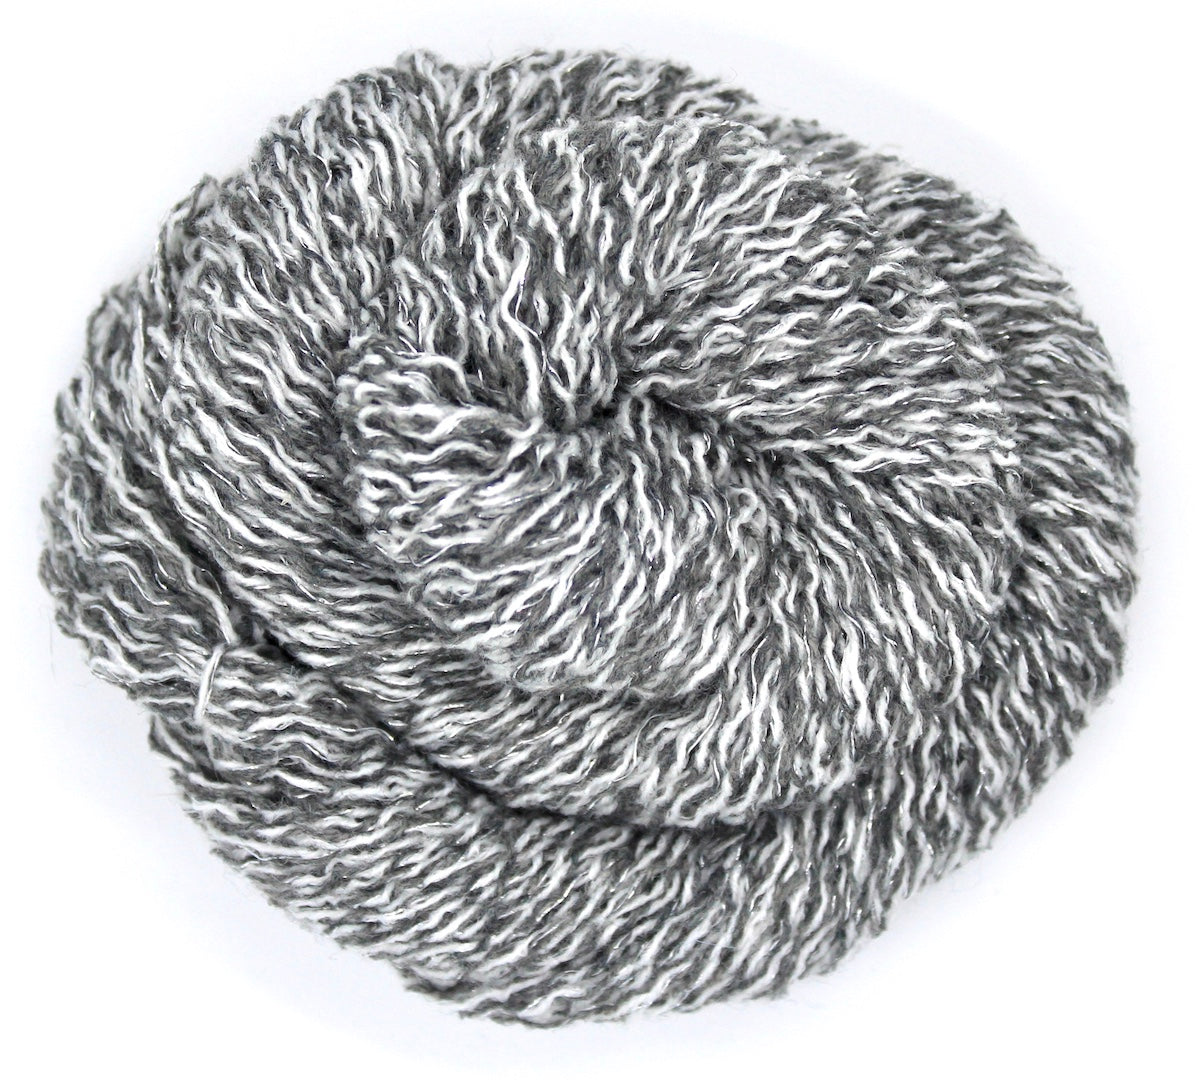 A skein of Vegan, White and Grey Variegated, Acrylic, Polyester, Sparkle, Sport weight Yarn recycled by hand from unwanted sweaters swirled attractively in the center of the frame. 